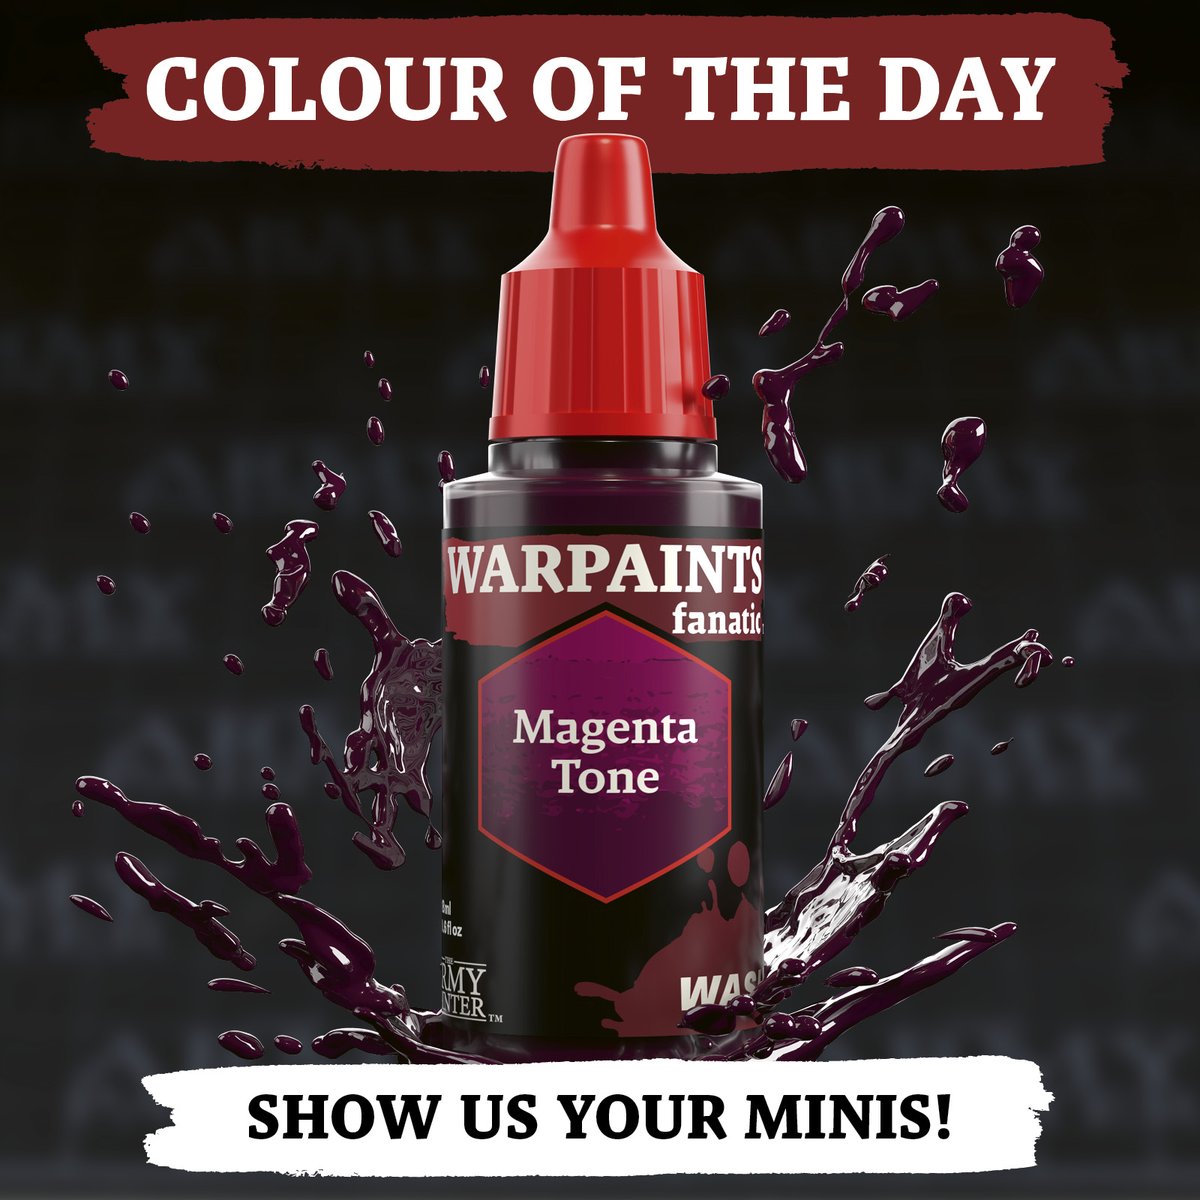 In today’s Colour of the Day, we highlight the new Warpaints Fanatic Magenta Tone Wash! 🖌 Have you painted any minis with Magenta Tone yet? Tell us or show us in the comments 👀 #thearmypainter #minipainting #getmoretimeforgaming #warpaintsfanatic #miniaturepainting